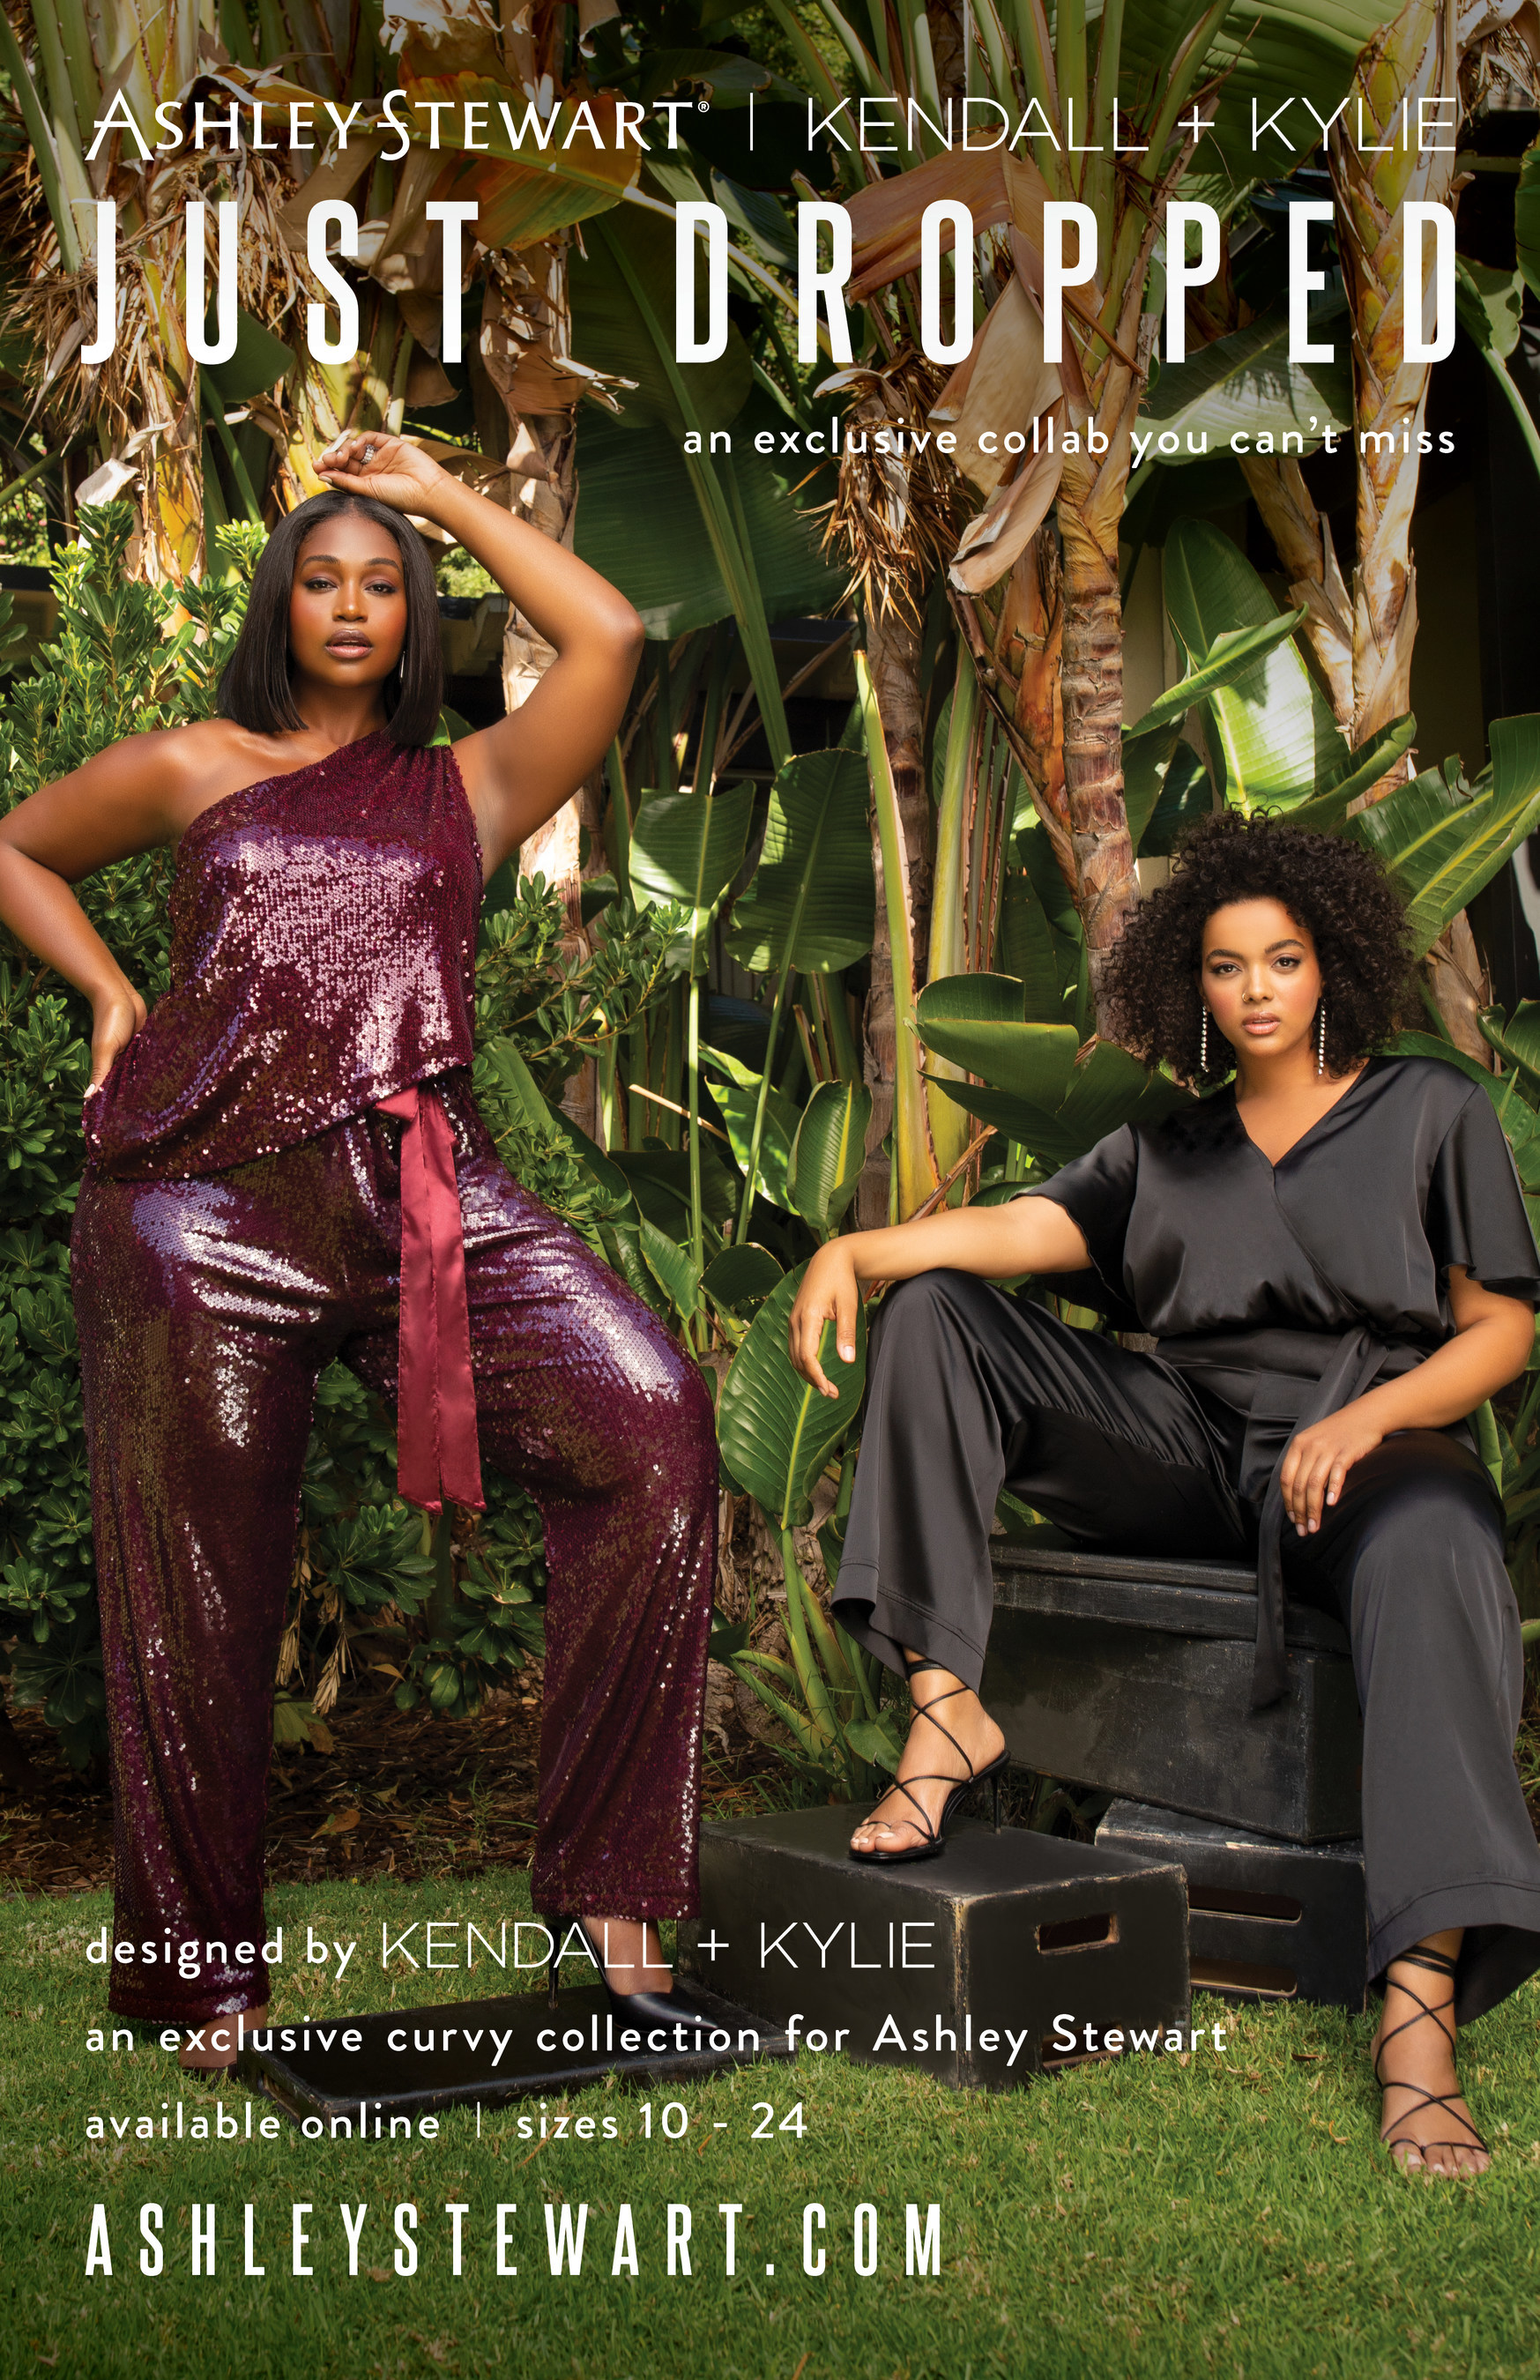 Ashley Stewart Partners With Kendall Kylie For Debut Curvy